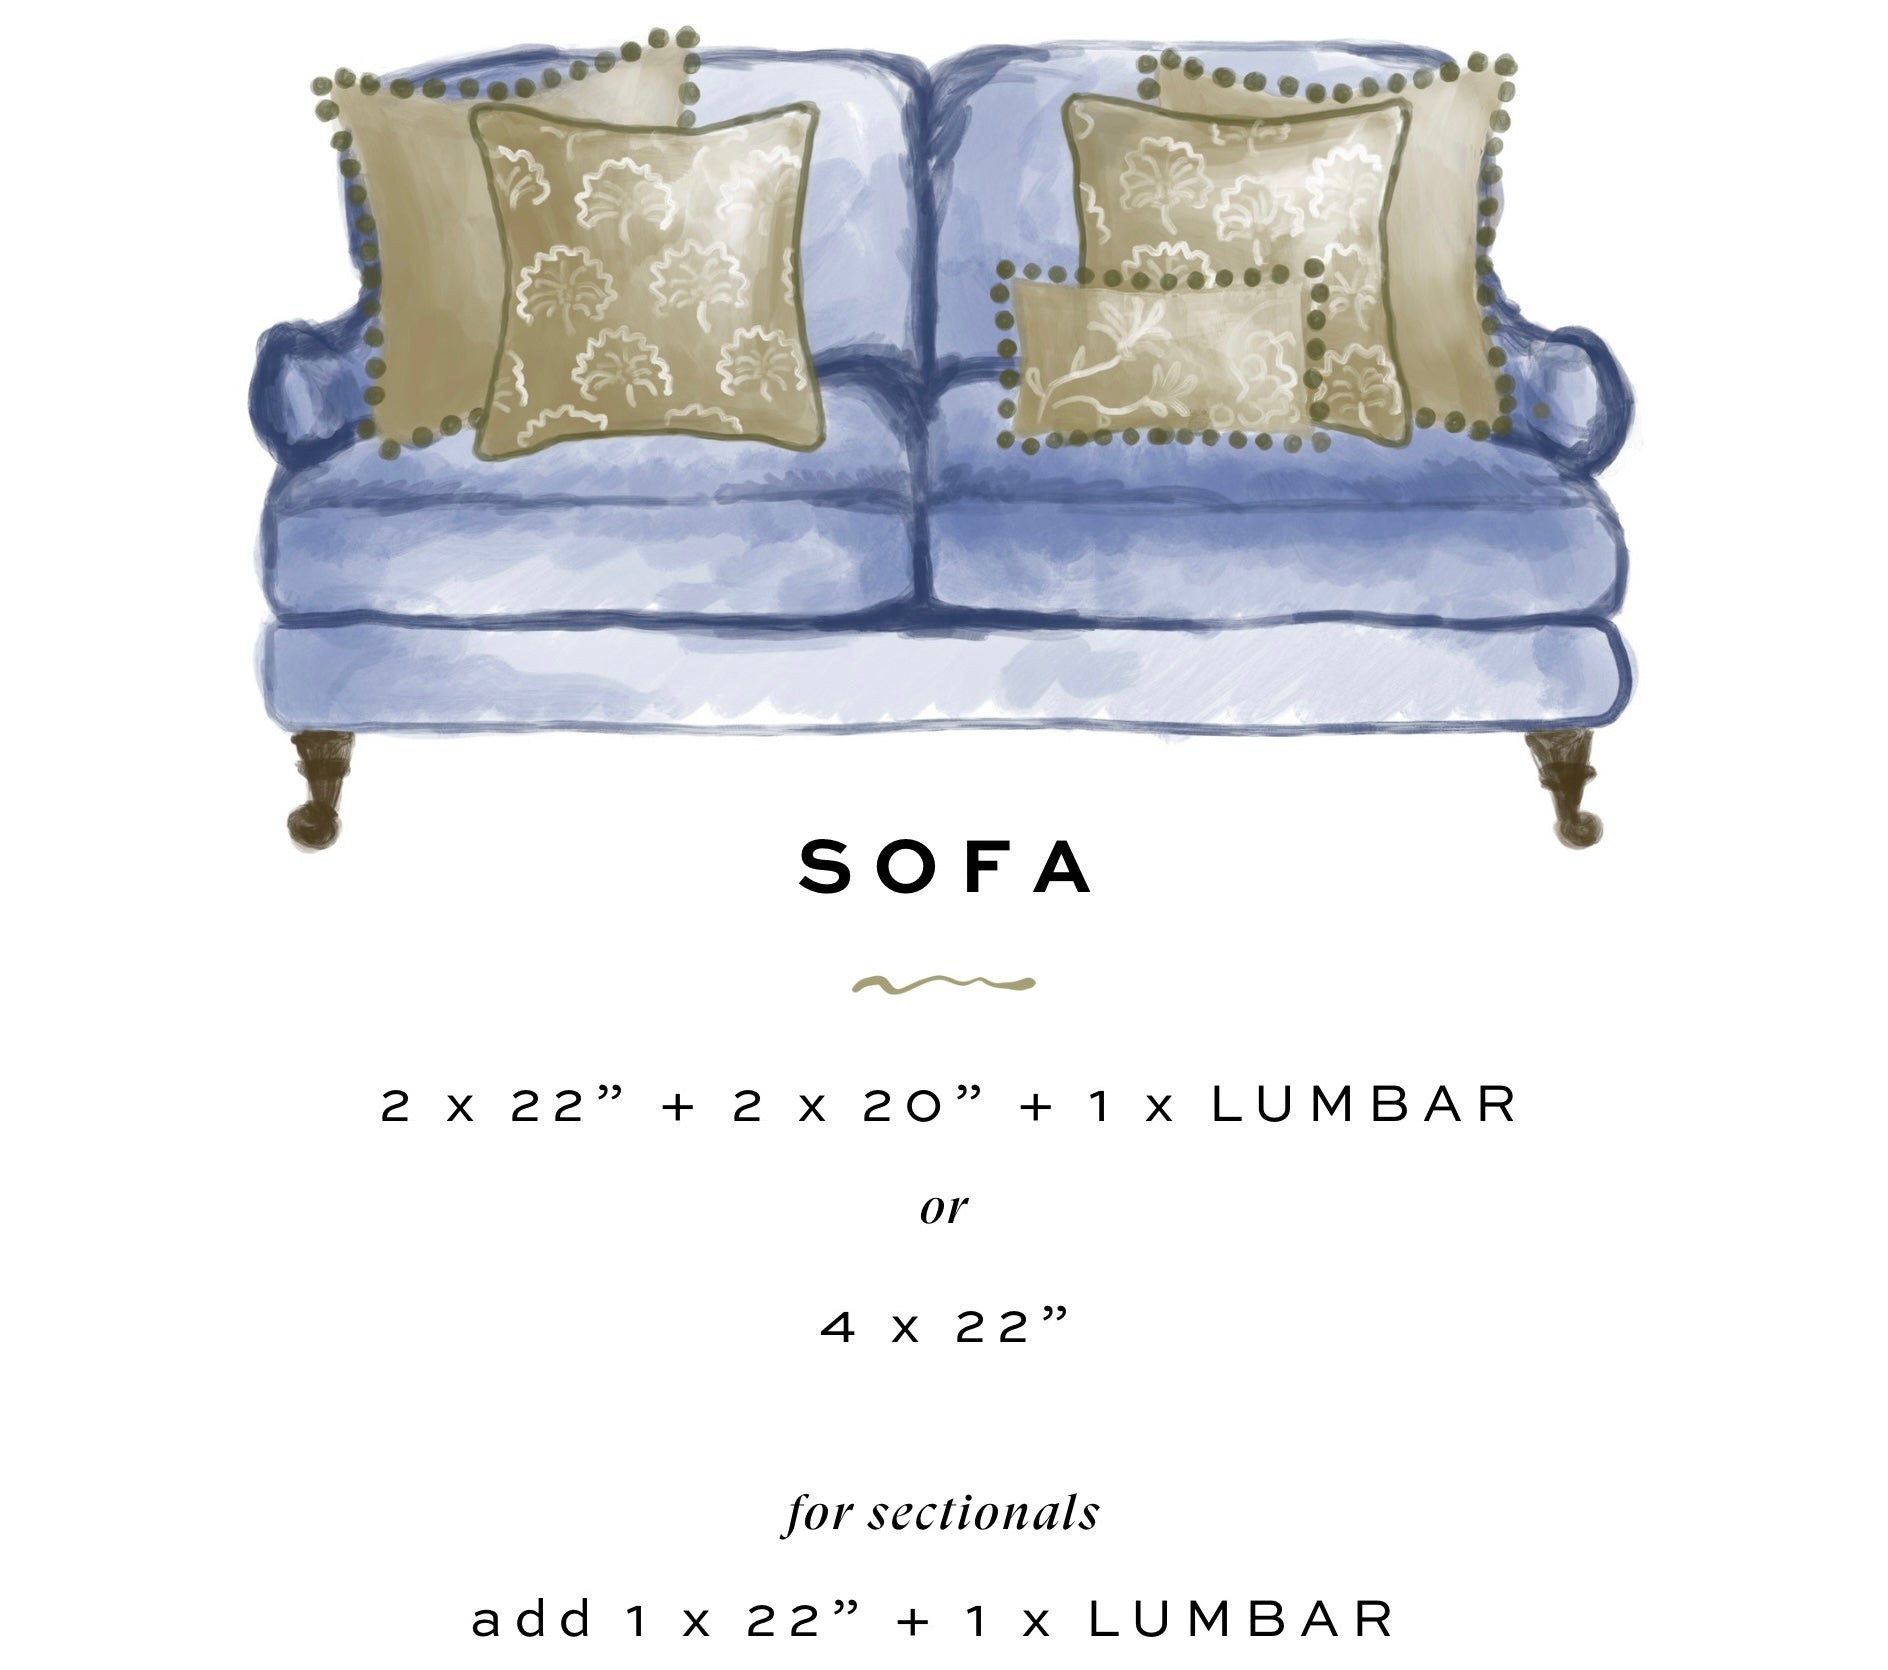 Sofa Style Guide for Pillows